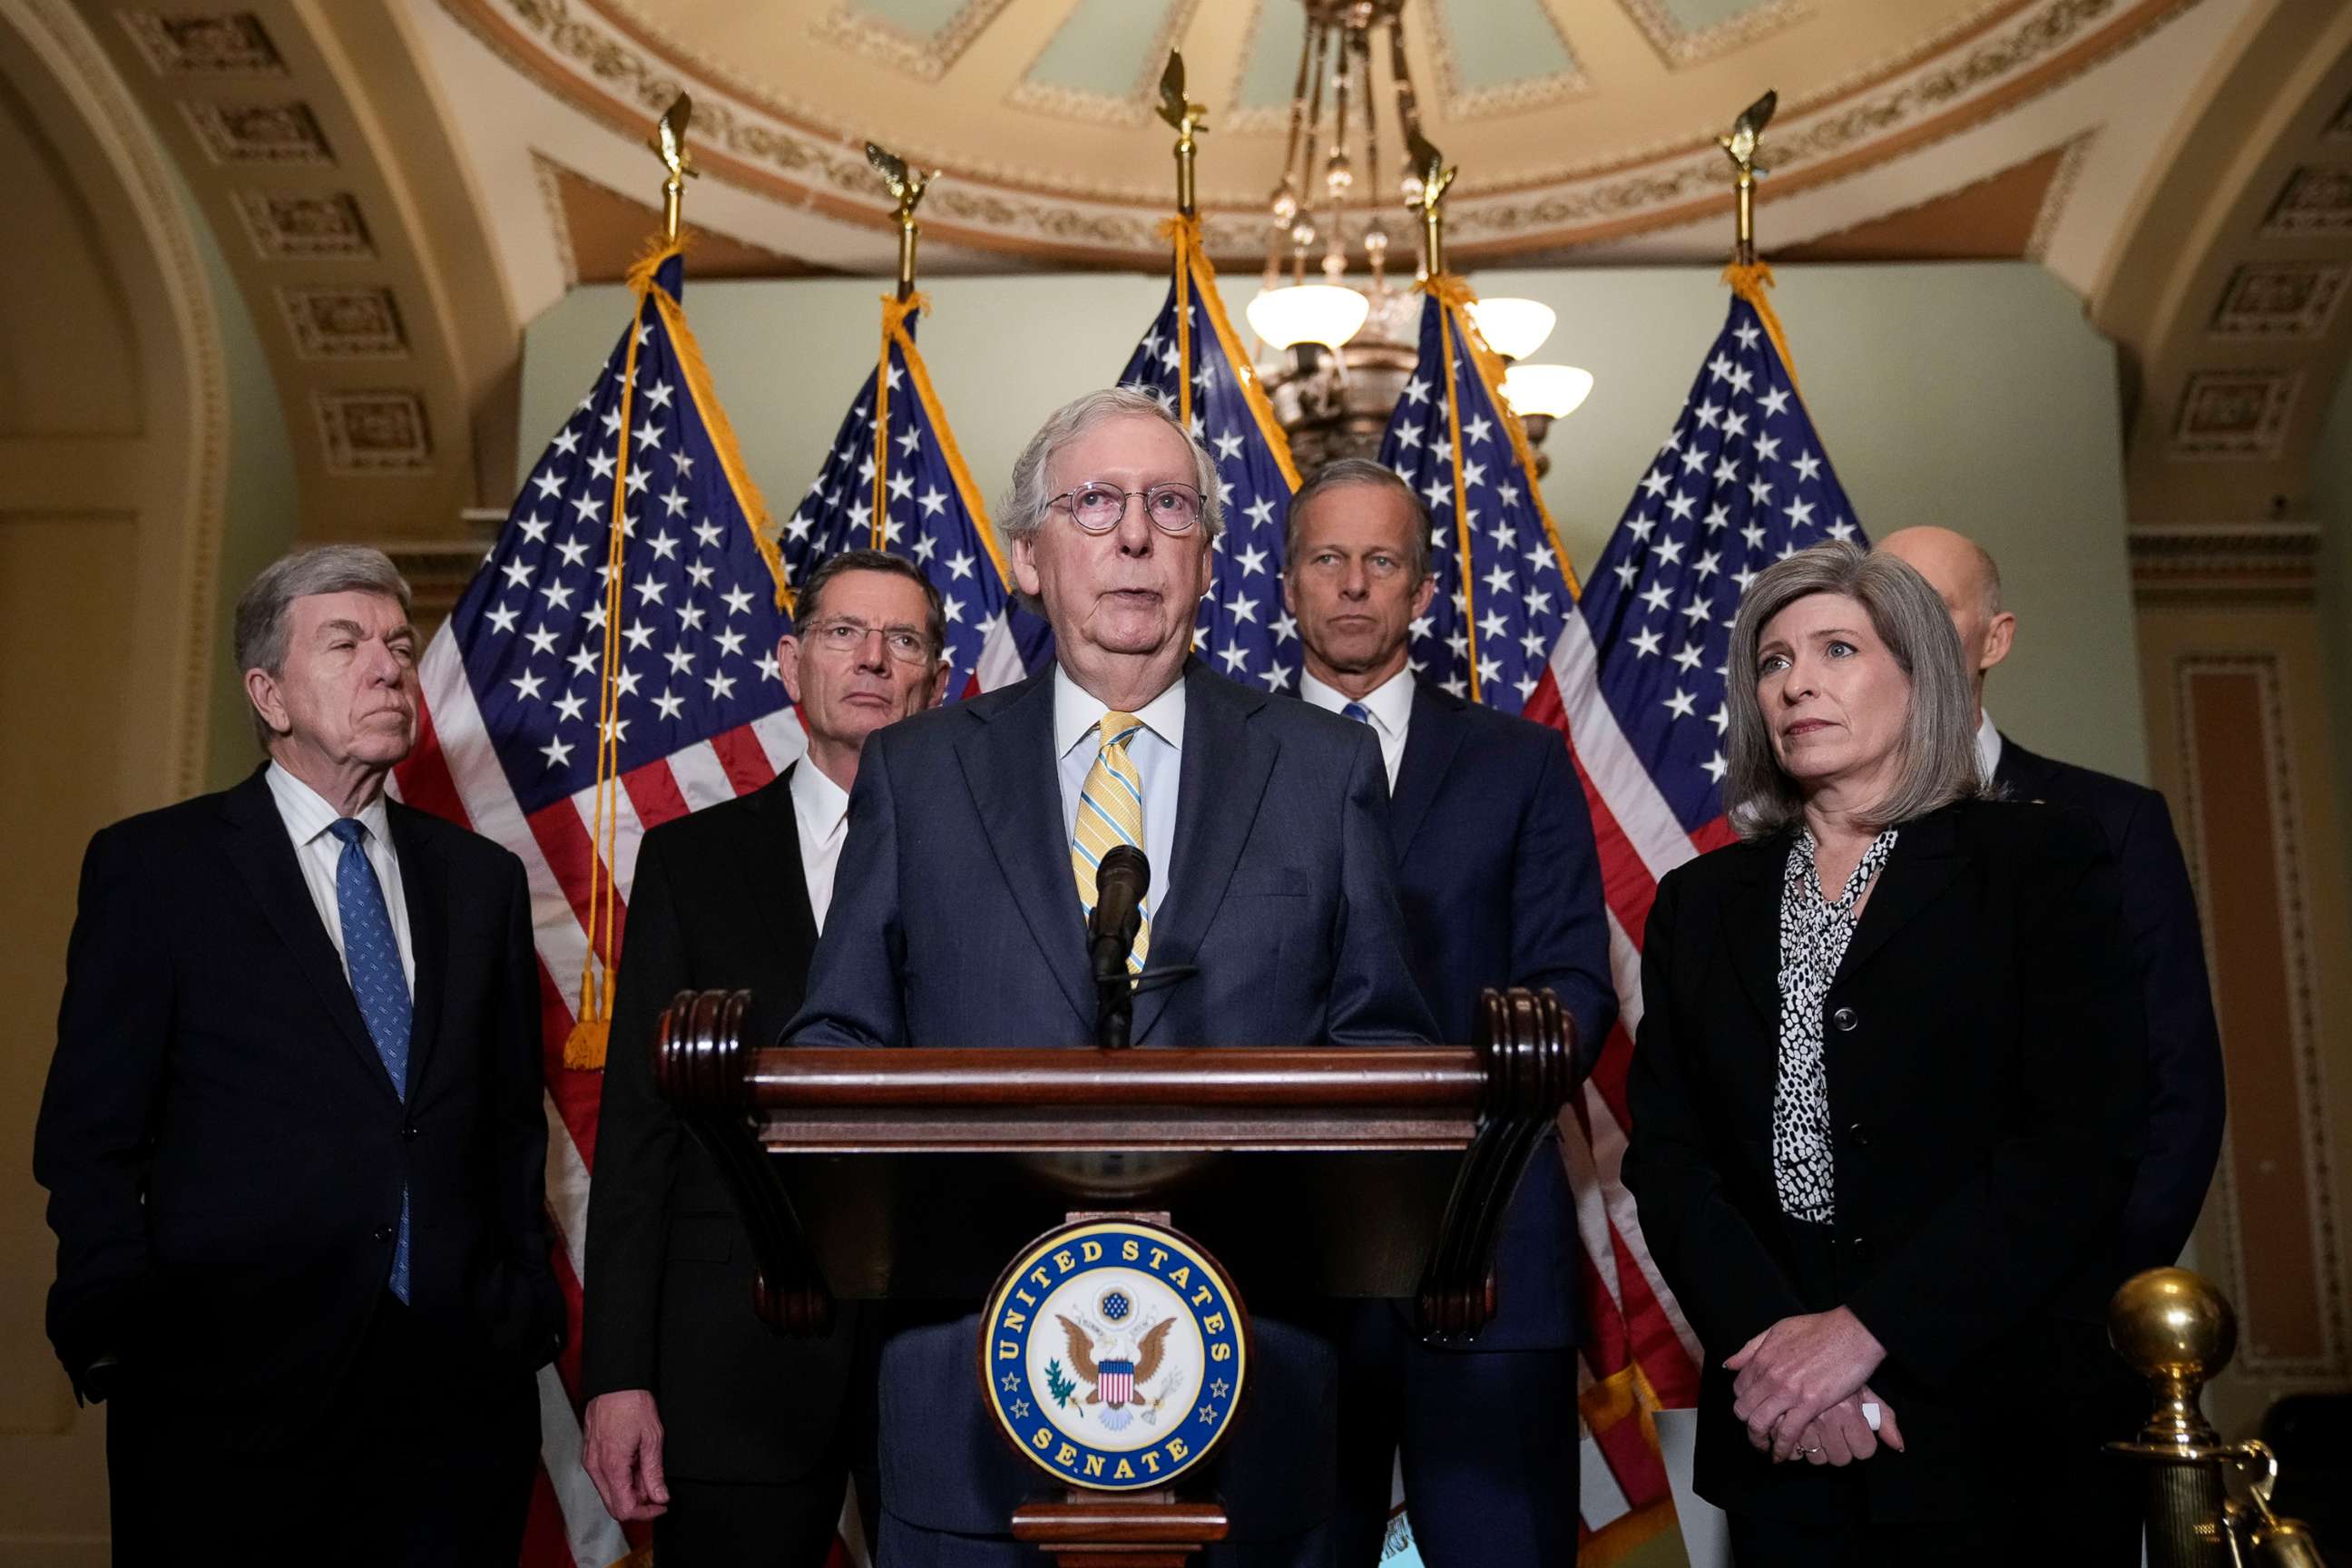 PHOTO: Senate Minority Leader Mitch McConnell speaks during a news conference after a closed-door lunch with Senate Republicans at the U.S. Capitol, on May 17, 2022, in Washington, D.C.